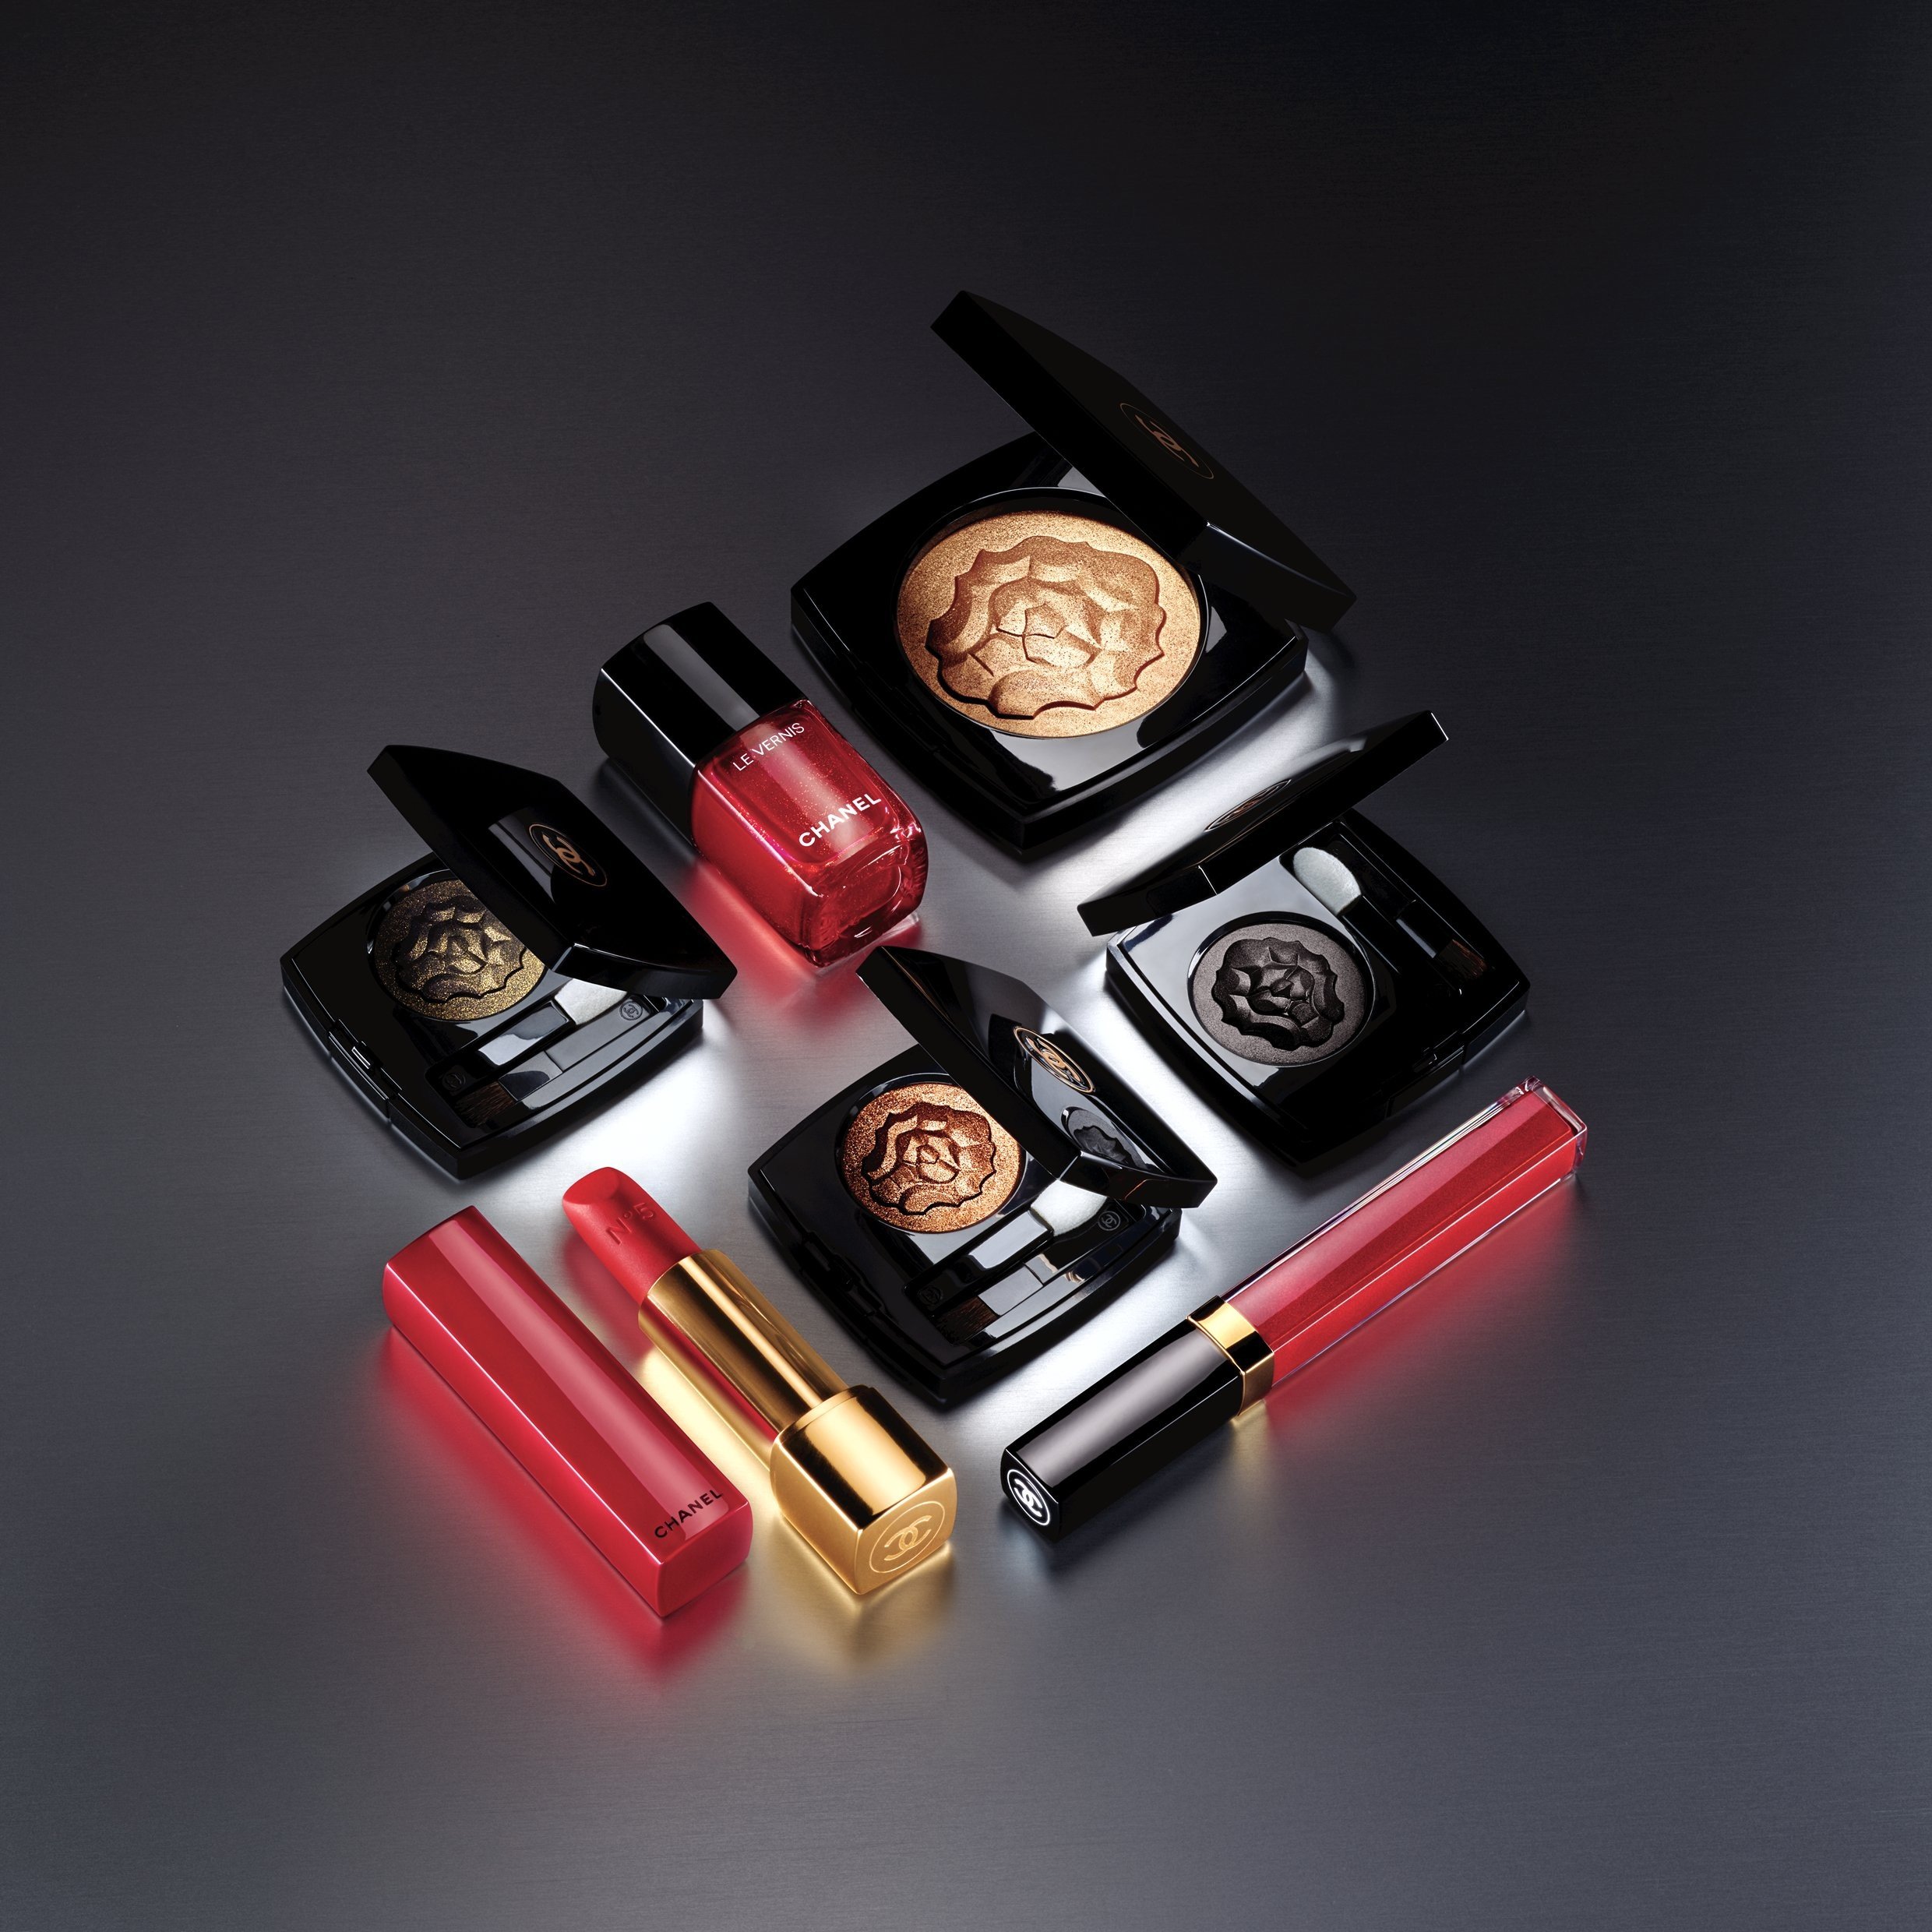 We review Chanel Beauté's Christmas make-up from its Collection Libre